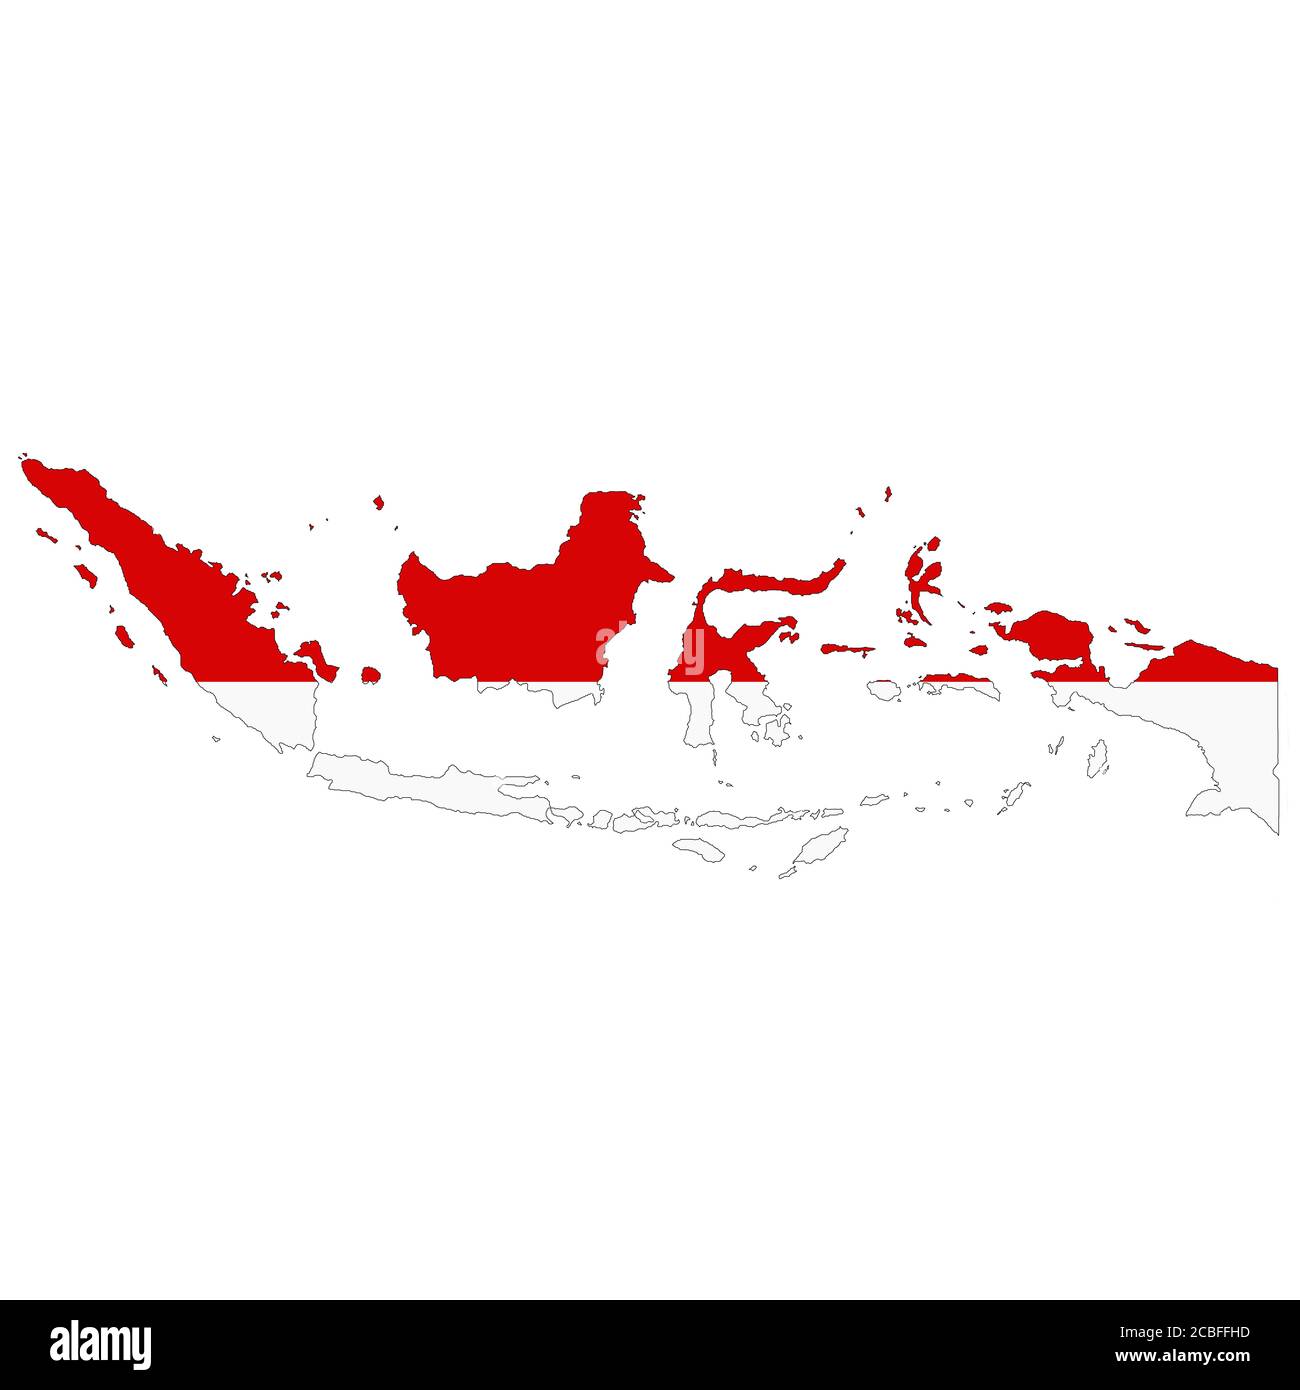 Indonesia map on white background with clipping path Stock Photo